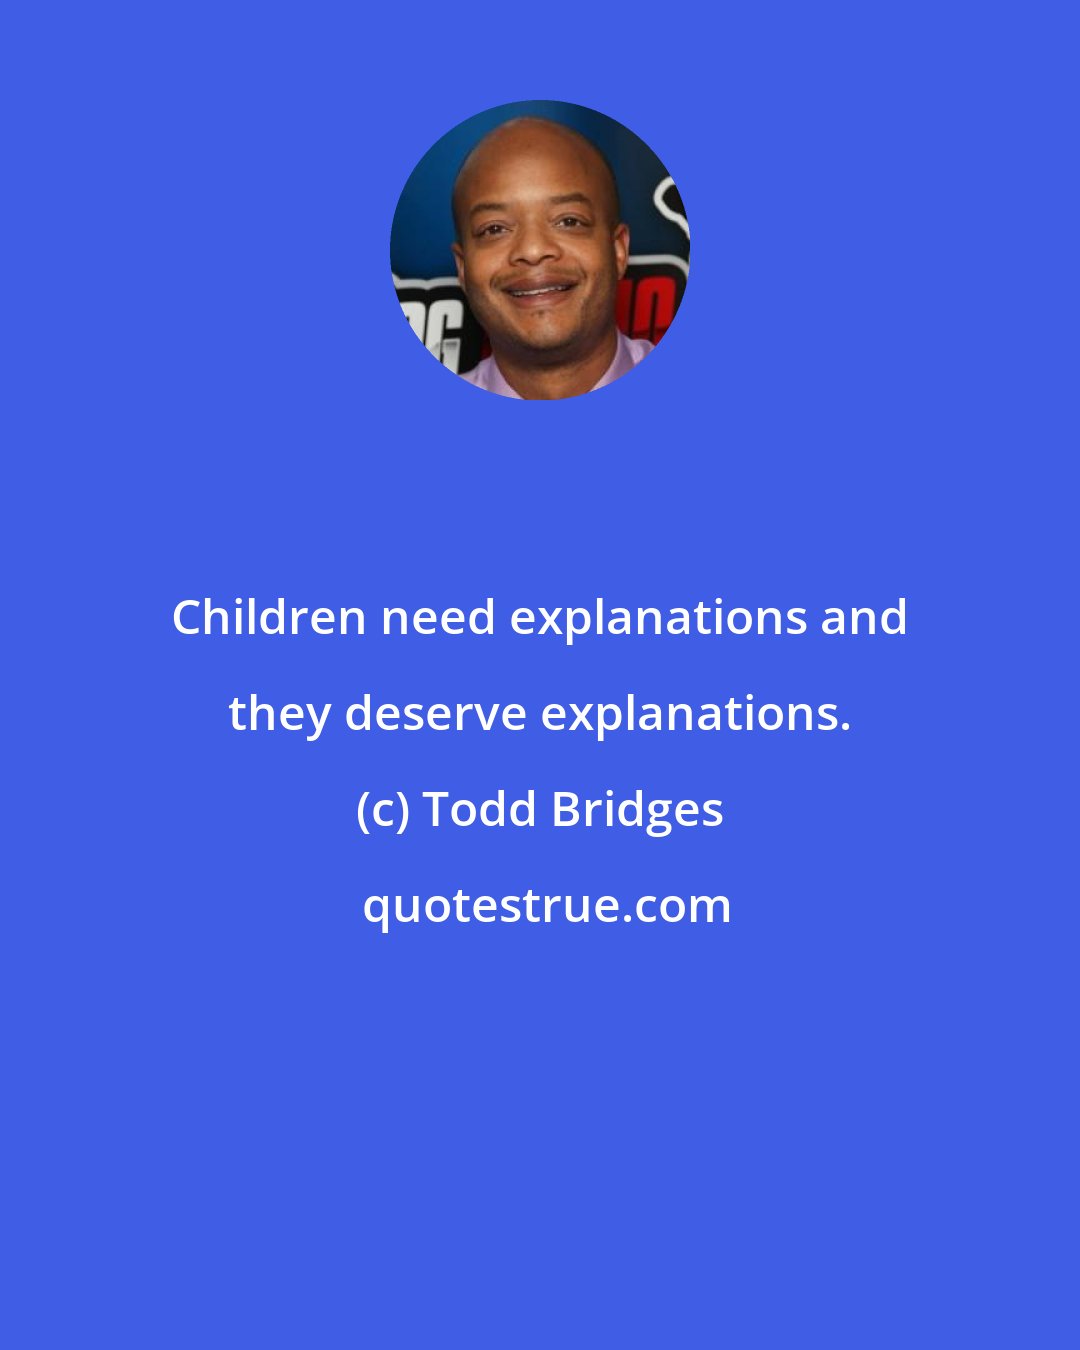 Todd Bridges: Children need explanations and they deserve explanations.